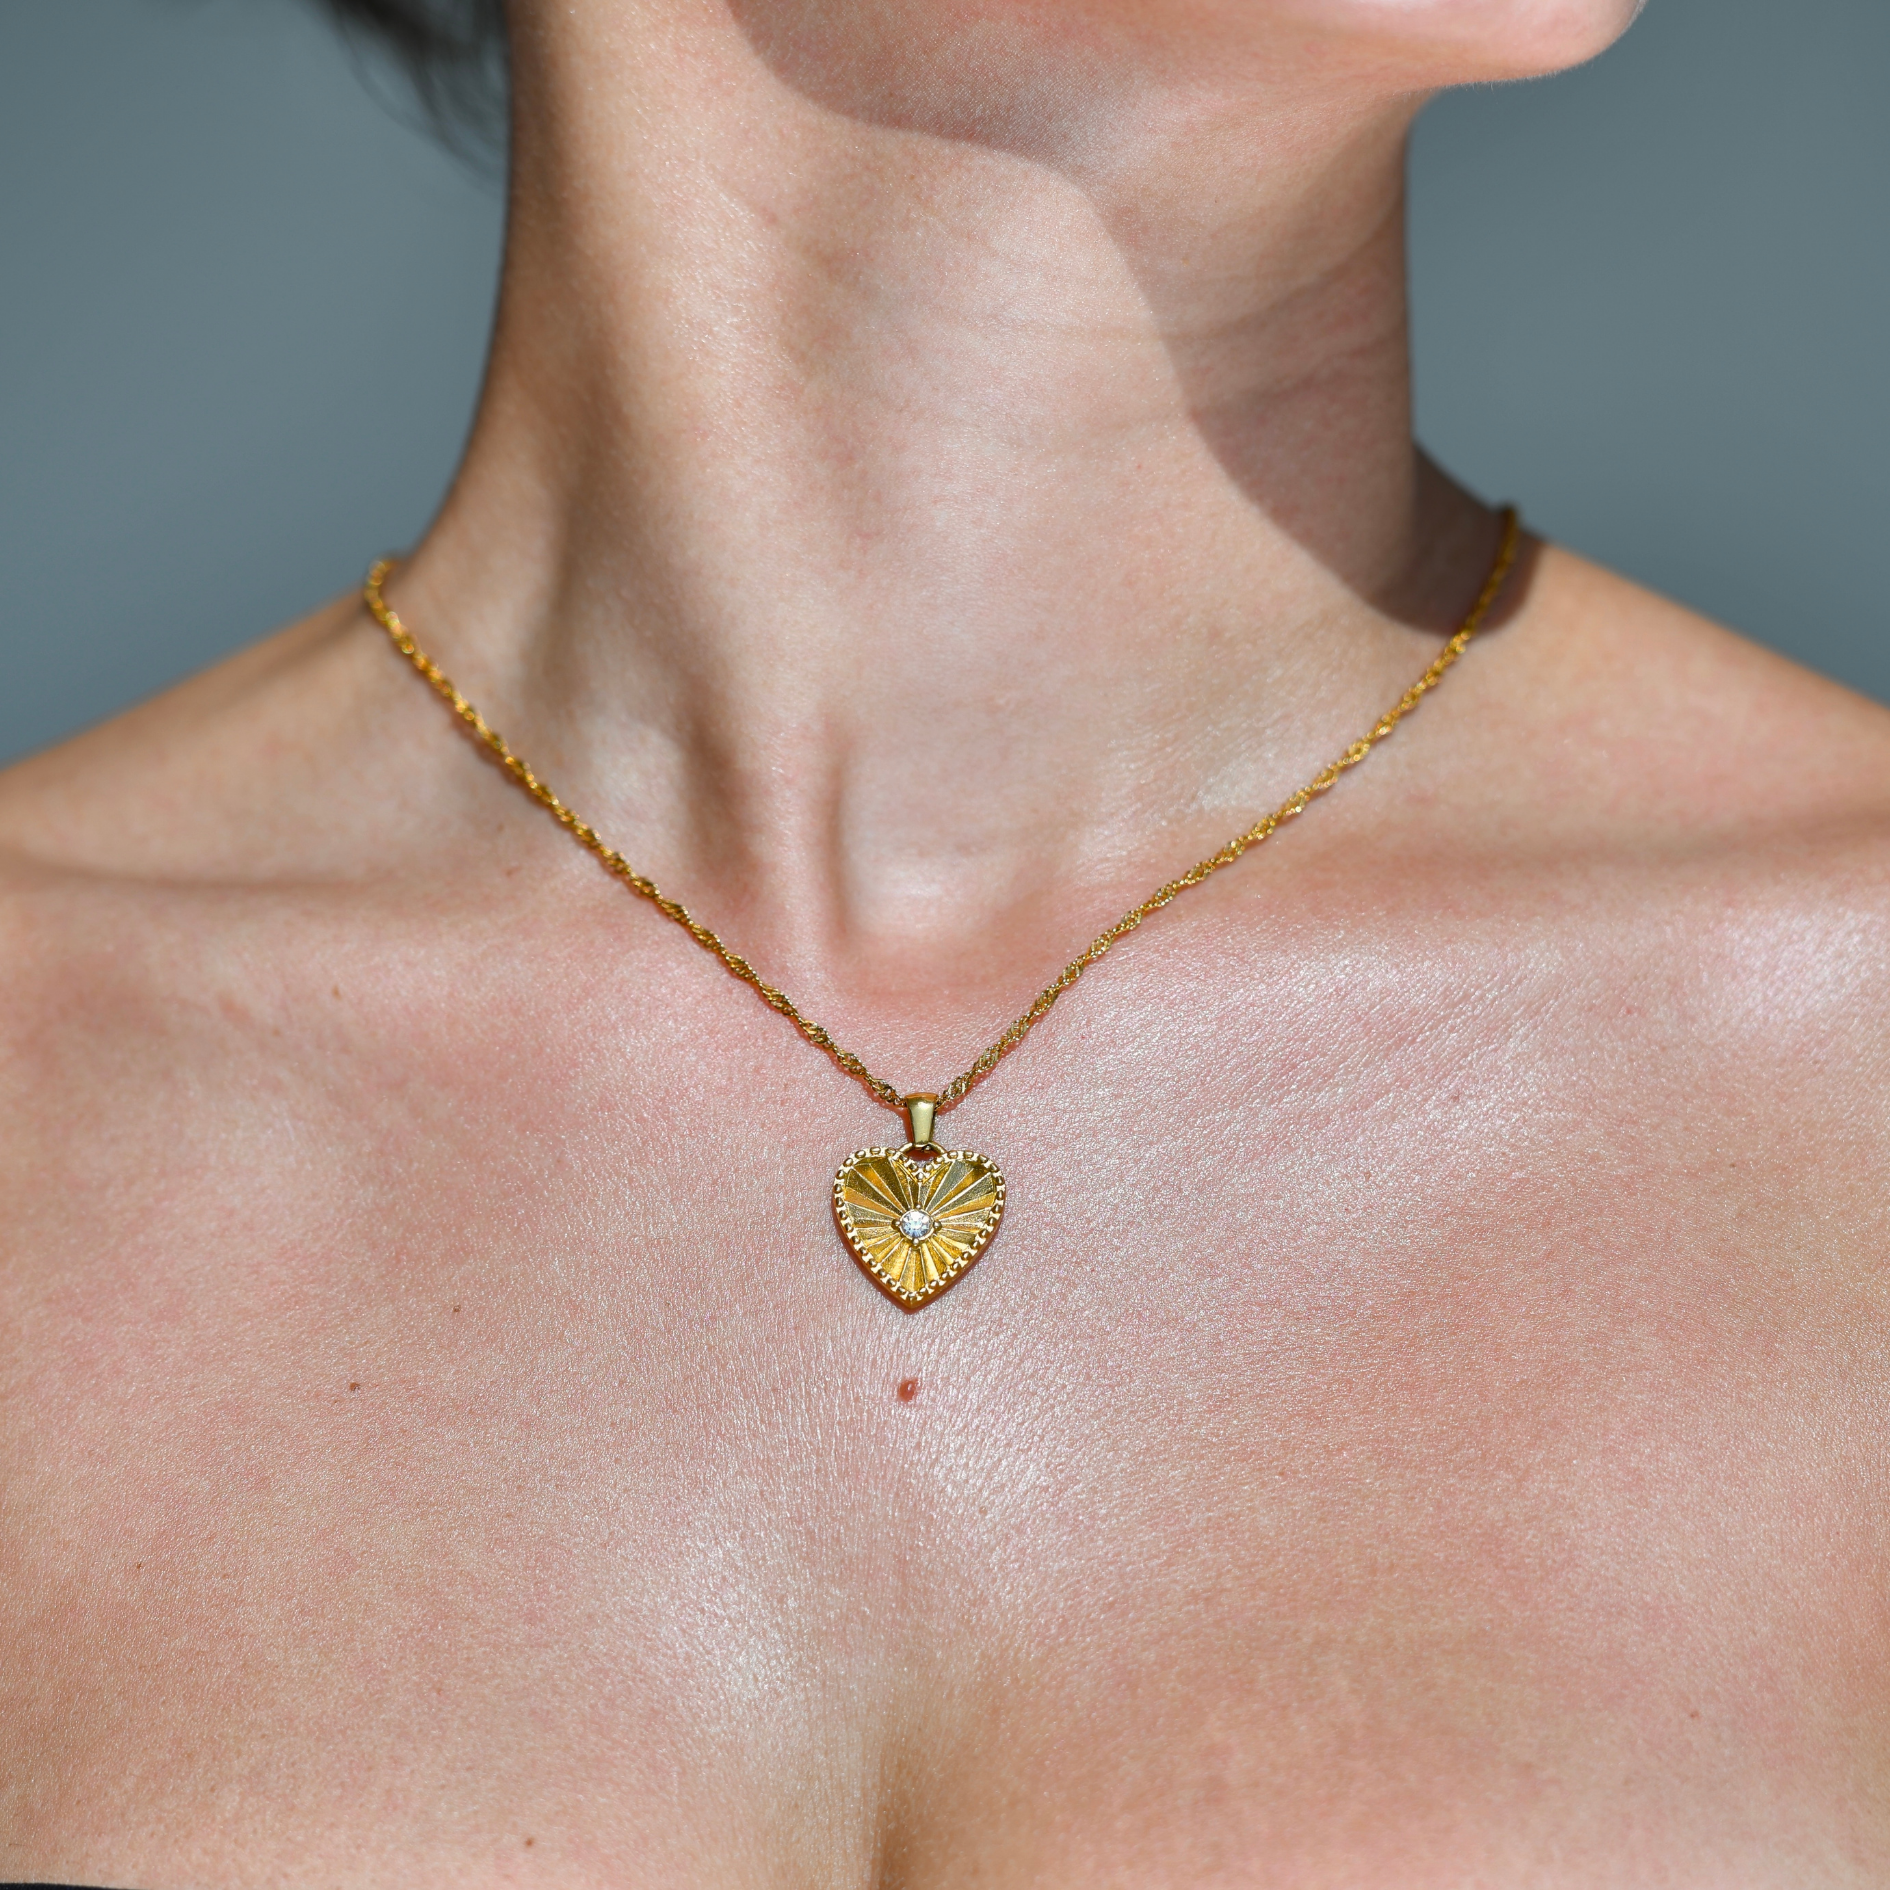 Gold plated waterproof  chain necklace with a heart pendant droping on the chain. A zircon stone in the middle of the heart. The heart has engraved rays pattern starting from the middle opening the borders of the gold heart. Heart Pendant gold necklace.